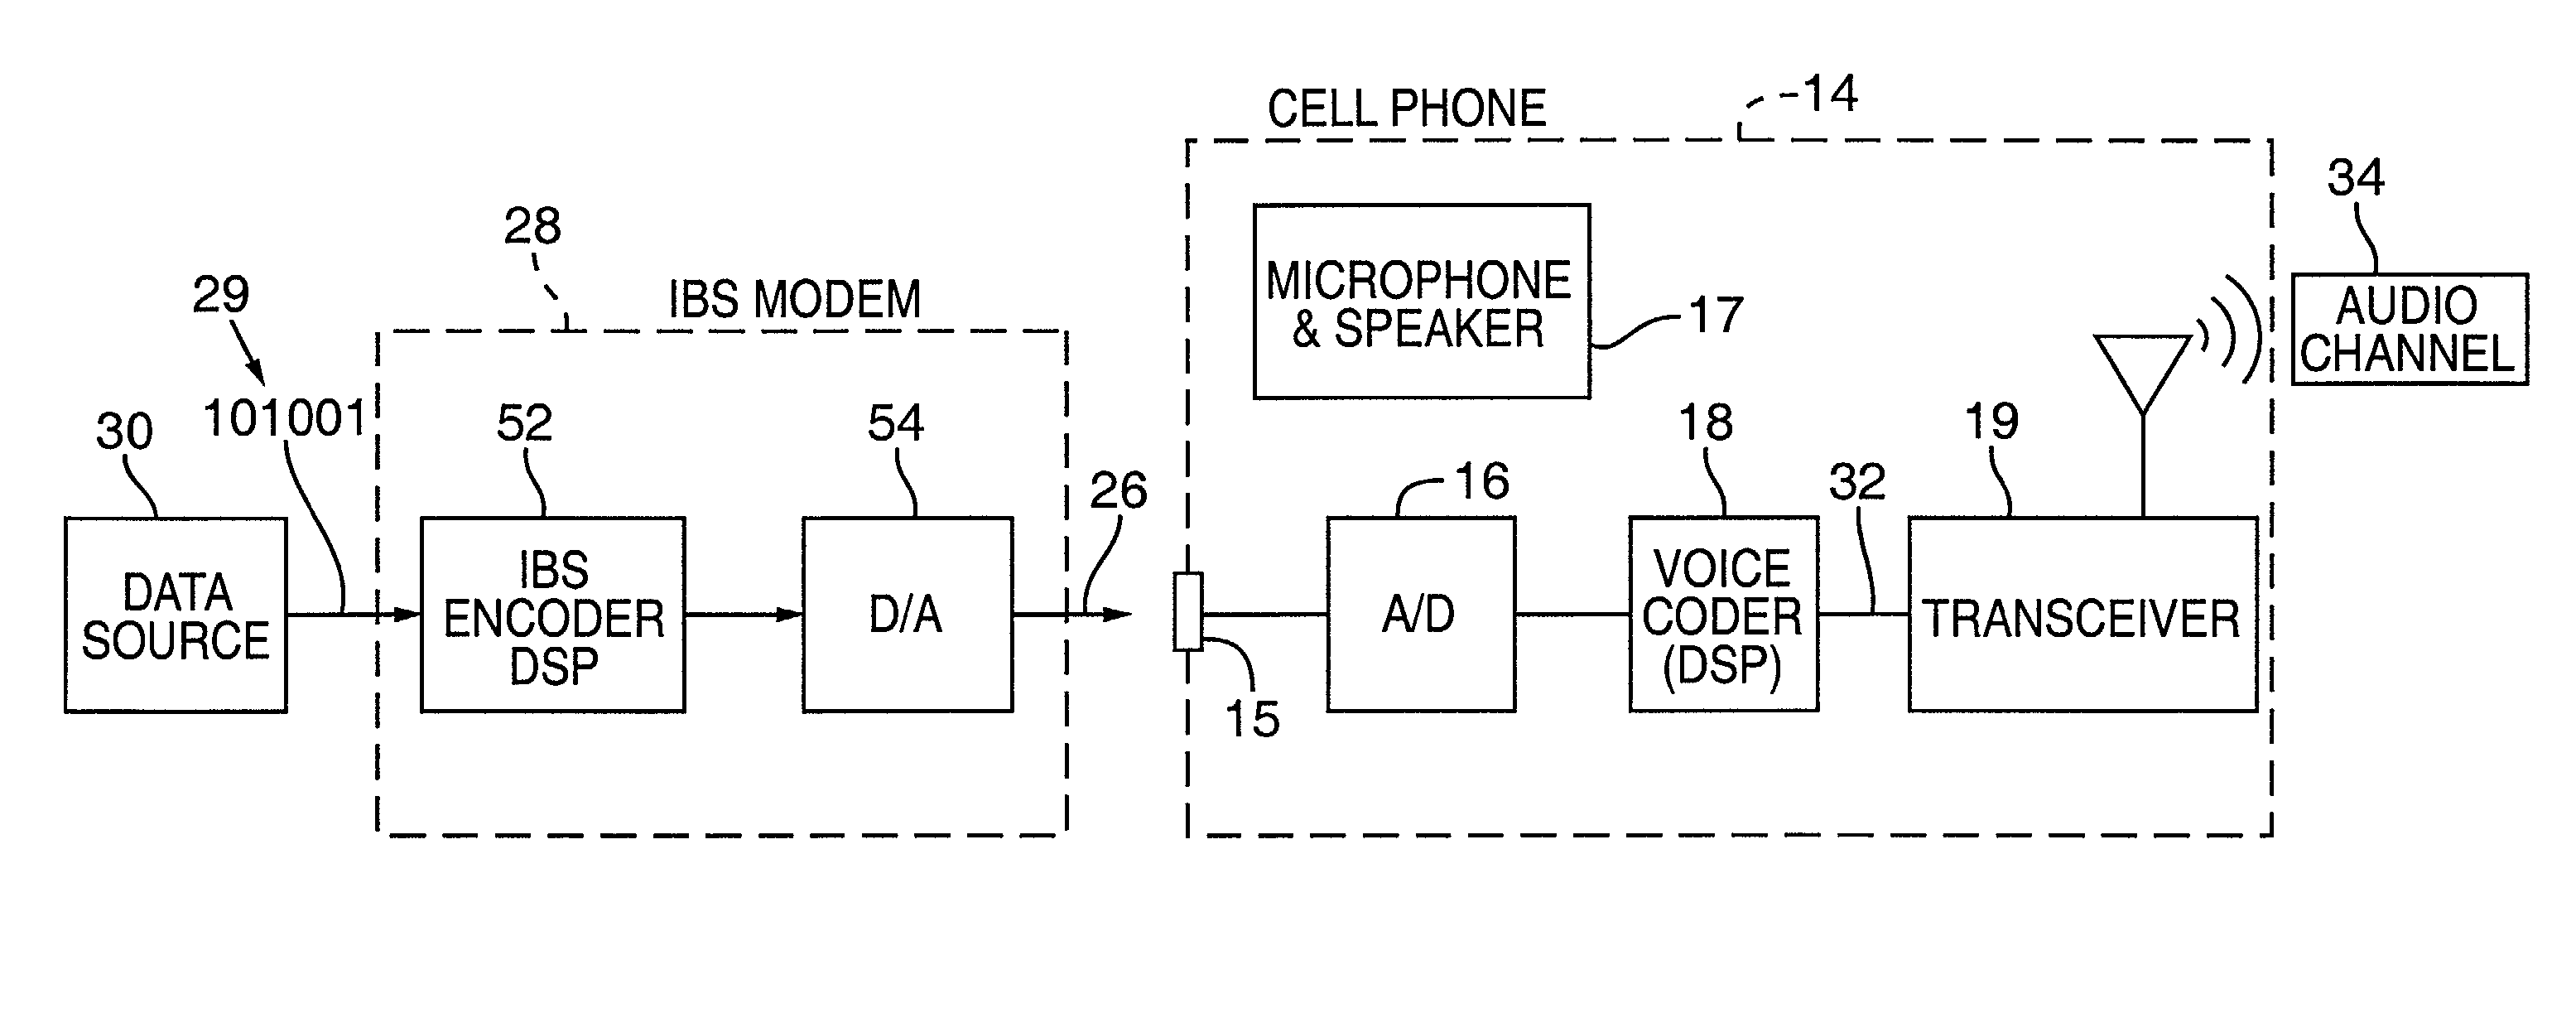 Software code for improved in-band signaling for data communications over digital wireless telecommunications networks